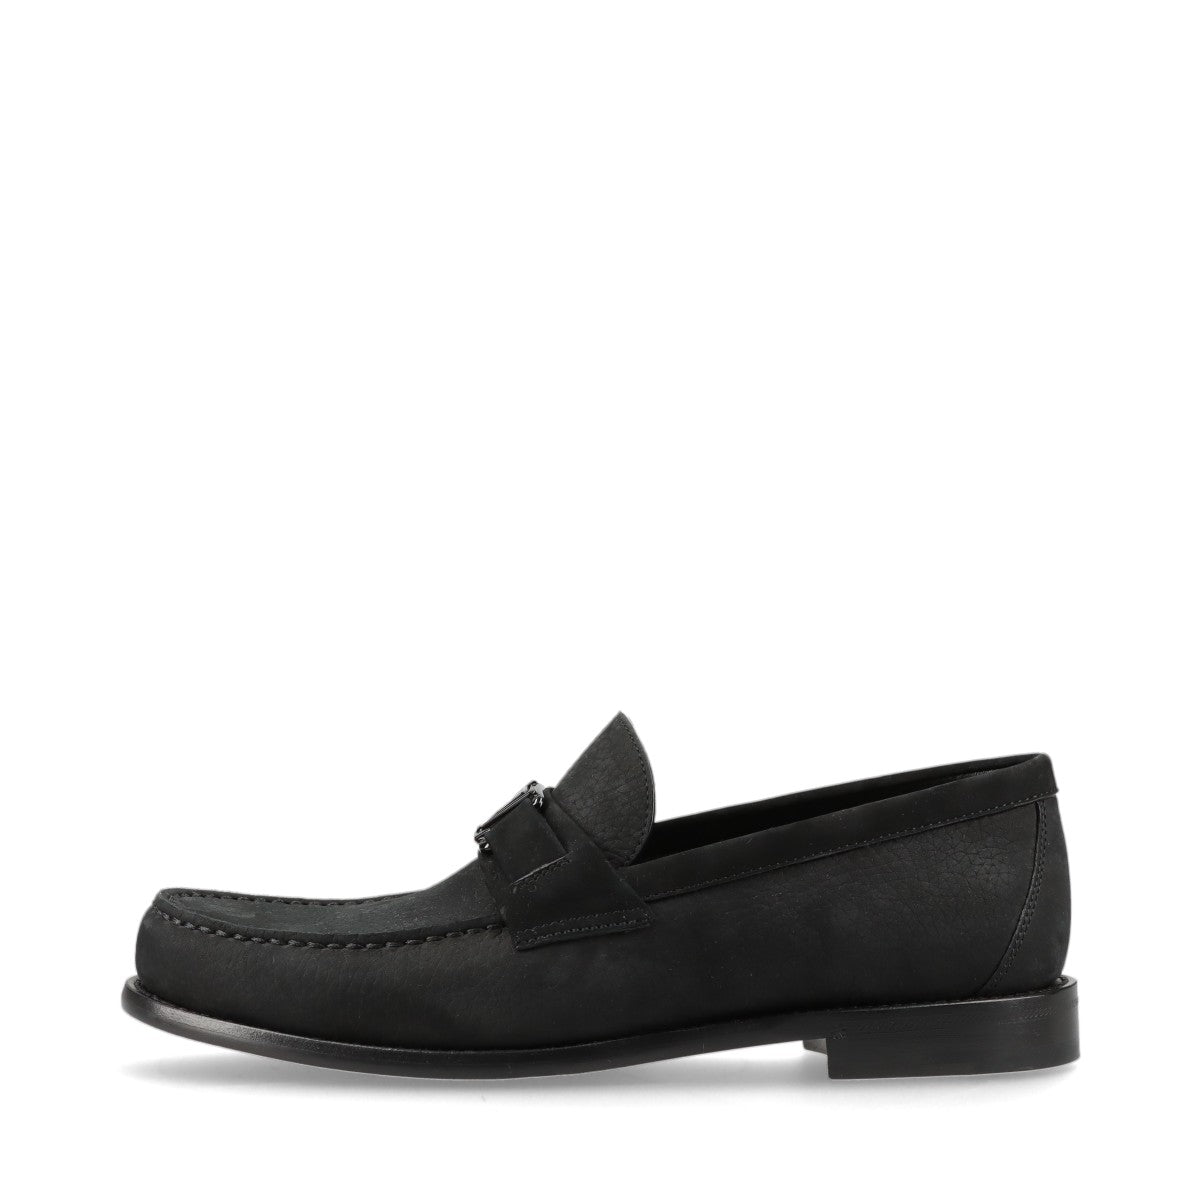 Louis Vuitton Major line 23 years Nubuck leather Loafer UK6 1/2 Men's Black FA0243 LV Logo box There is a bag